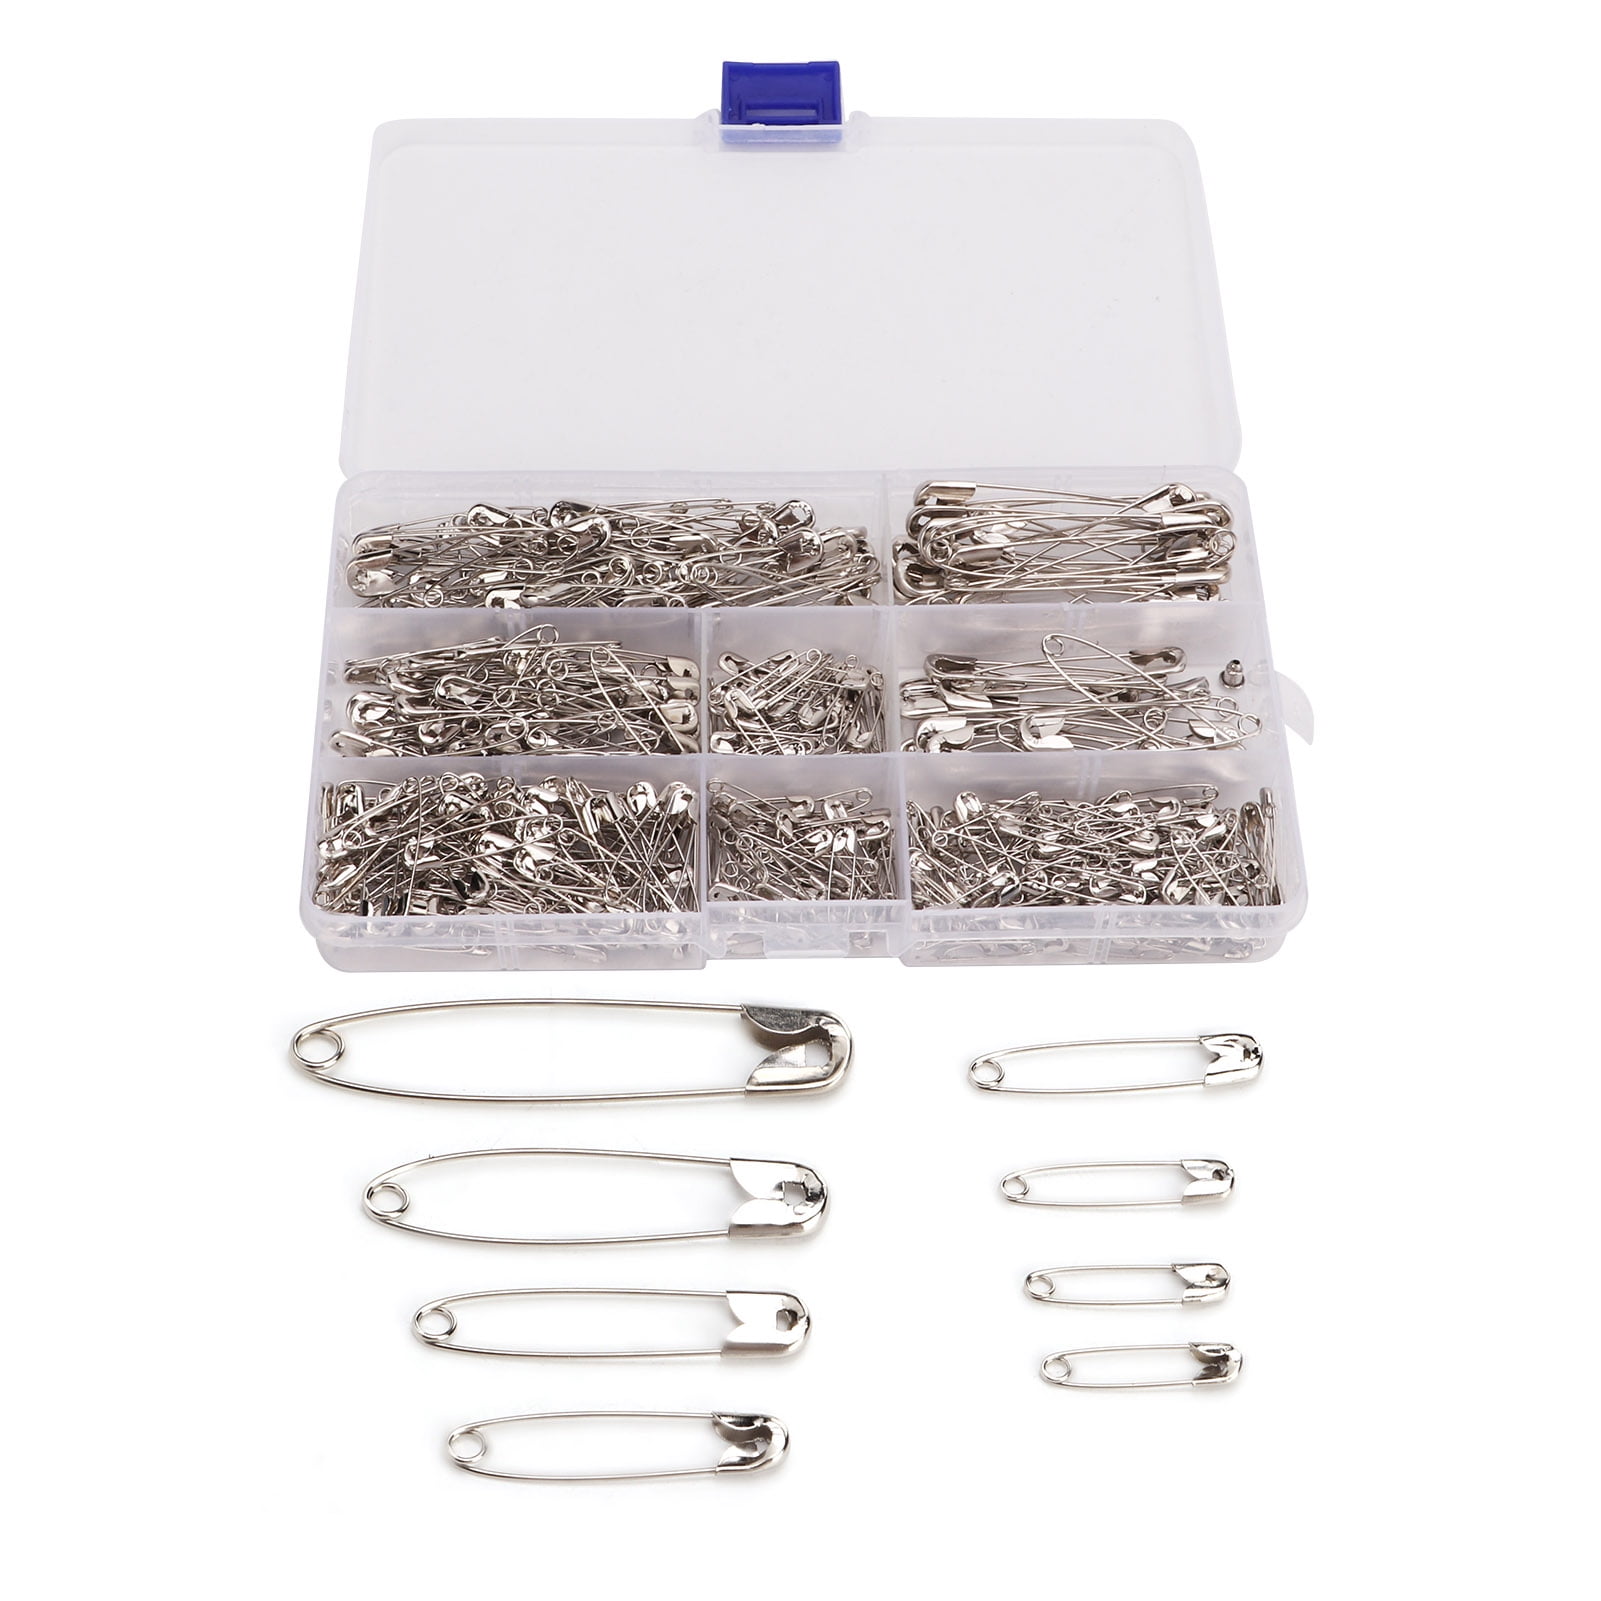 Wholesale 180pc Sewing Pin Set- Silver SILVER